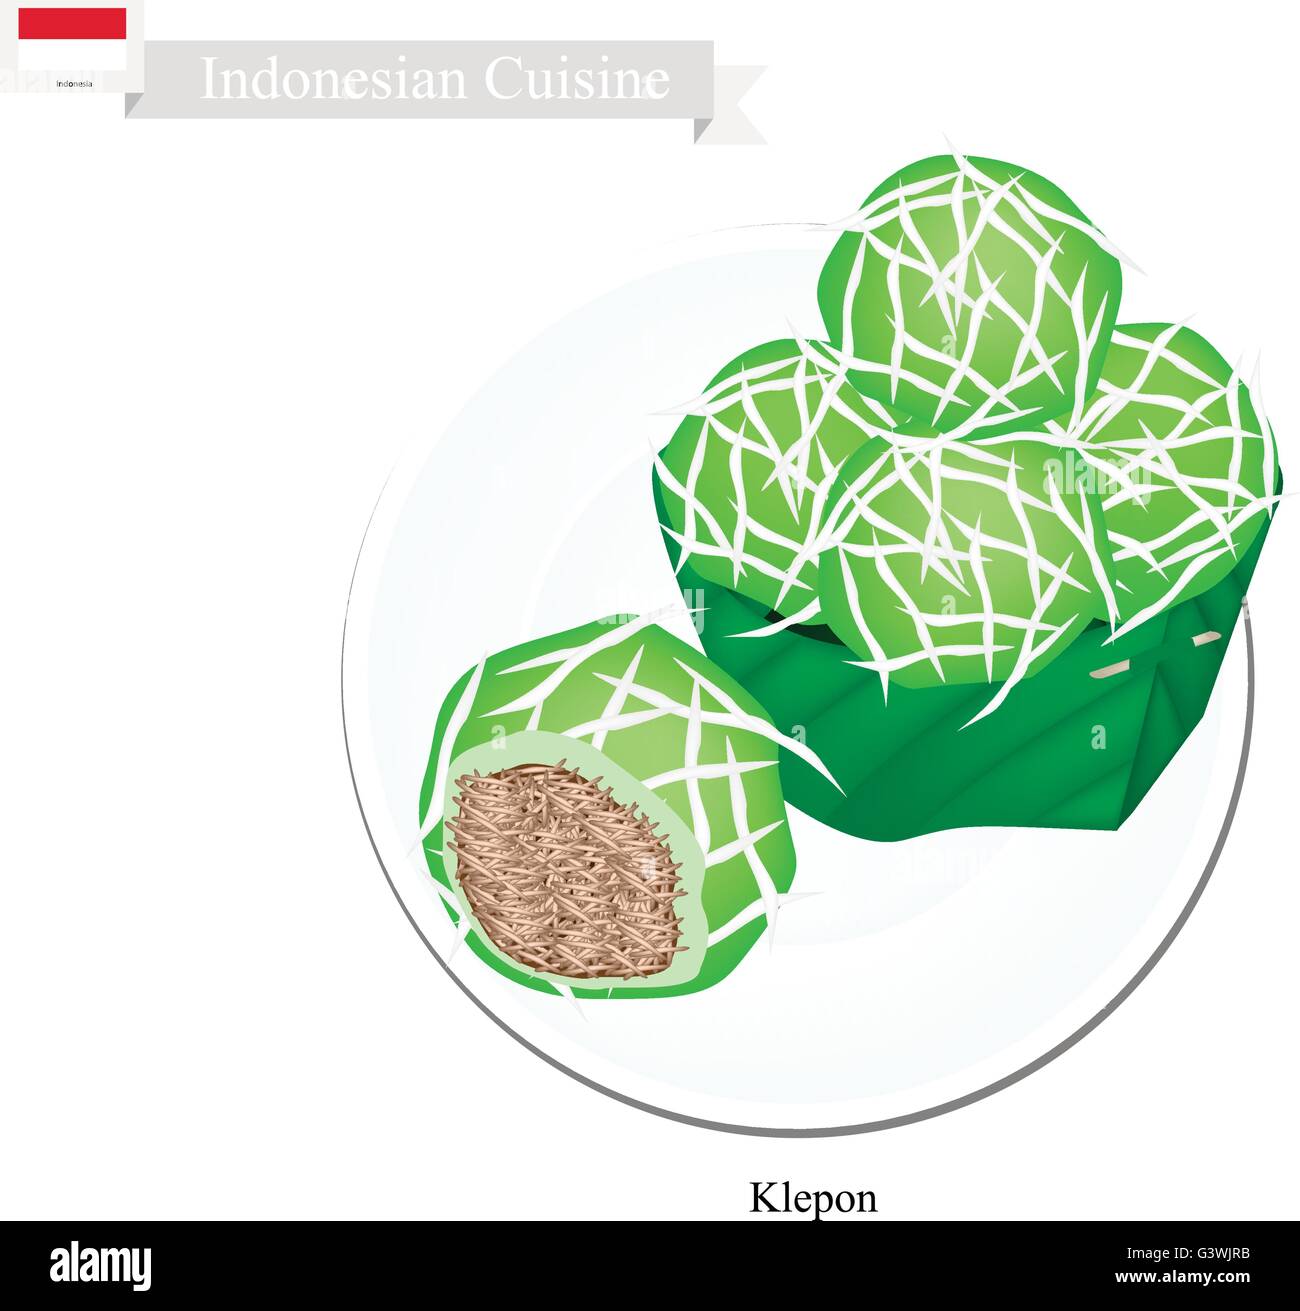 Indonesian Cuisine, Klepon or Traditional Pandanus Rice Balls Made From Glutinous Flour and Grated Coconut with Caramelized Coco Stock Vector